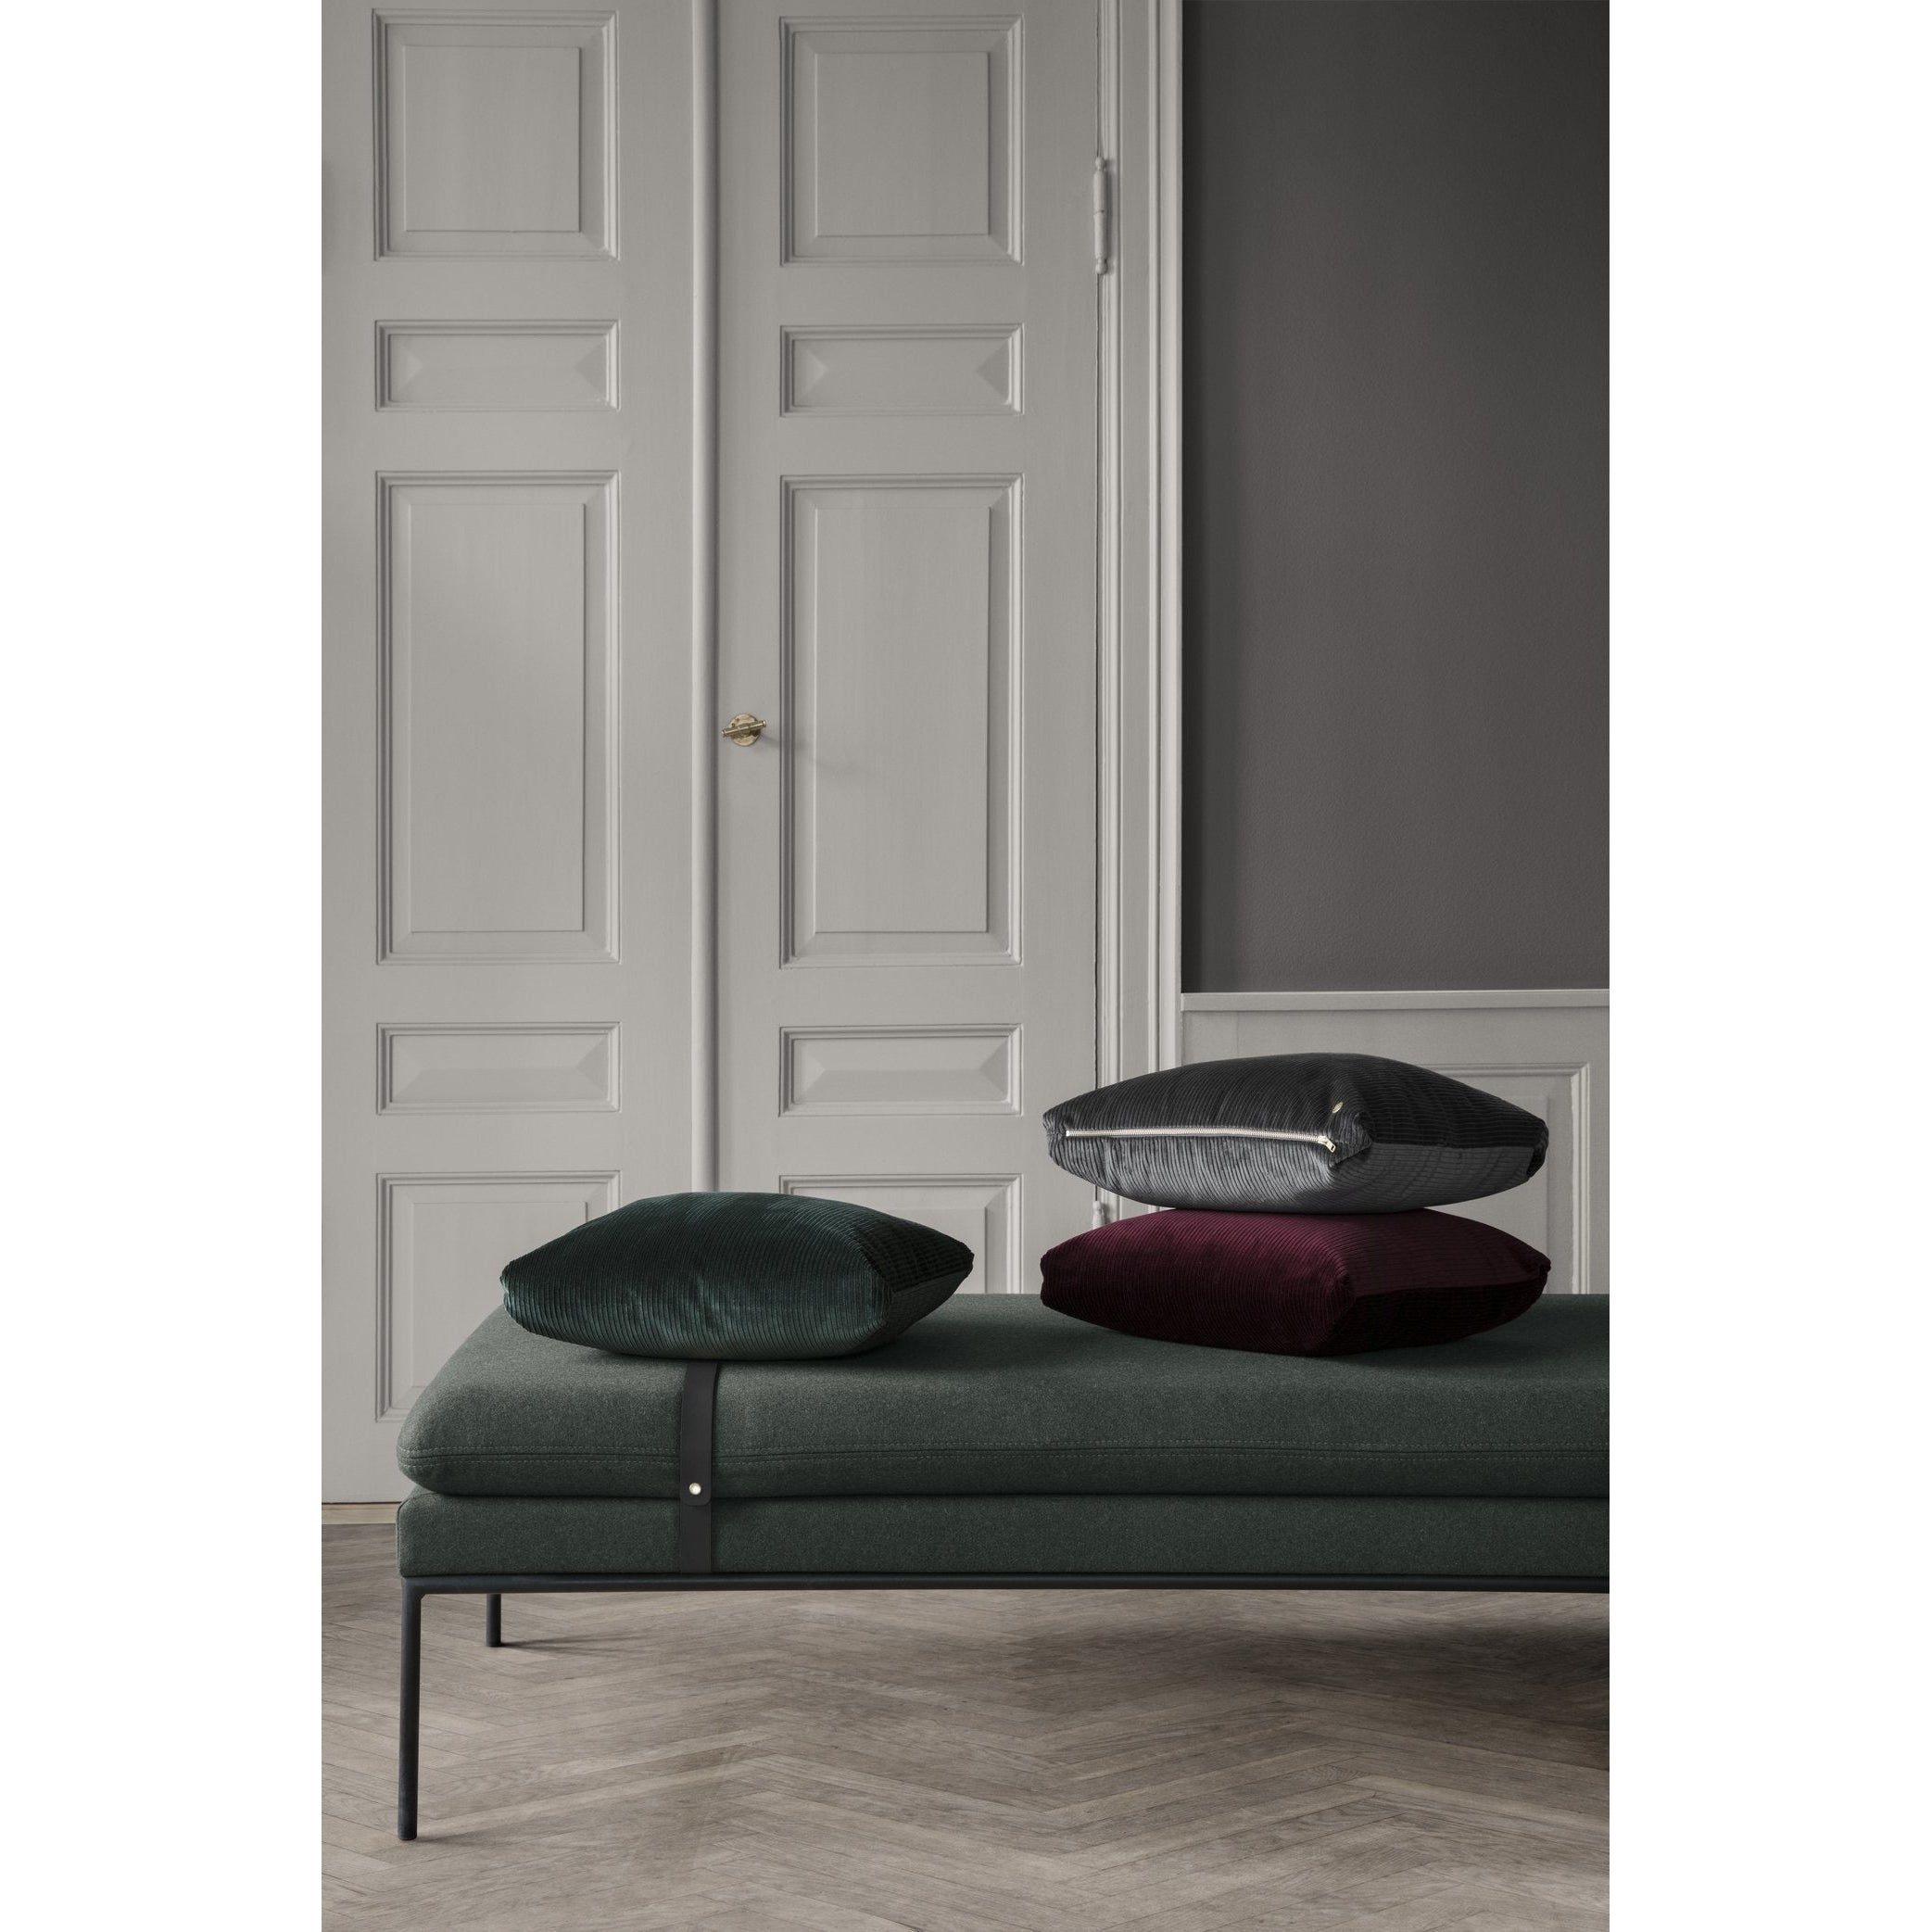 Ferm Living Turn Day Bed Fiord, Rouille Solide